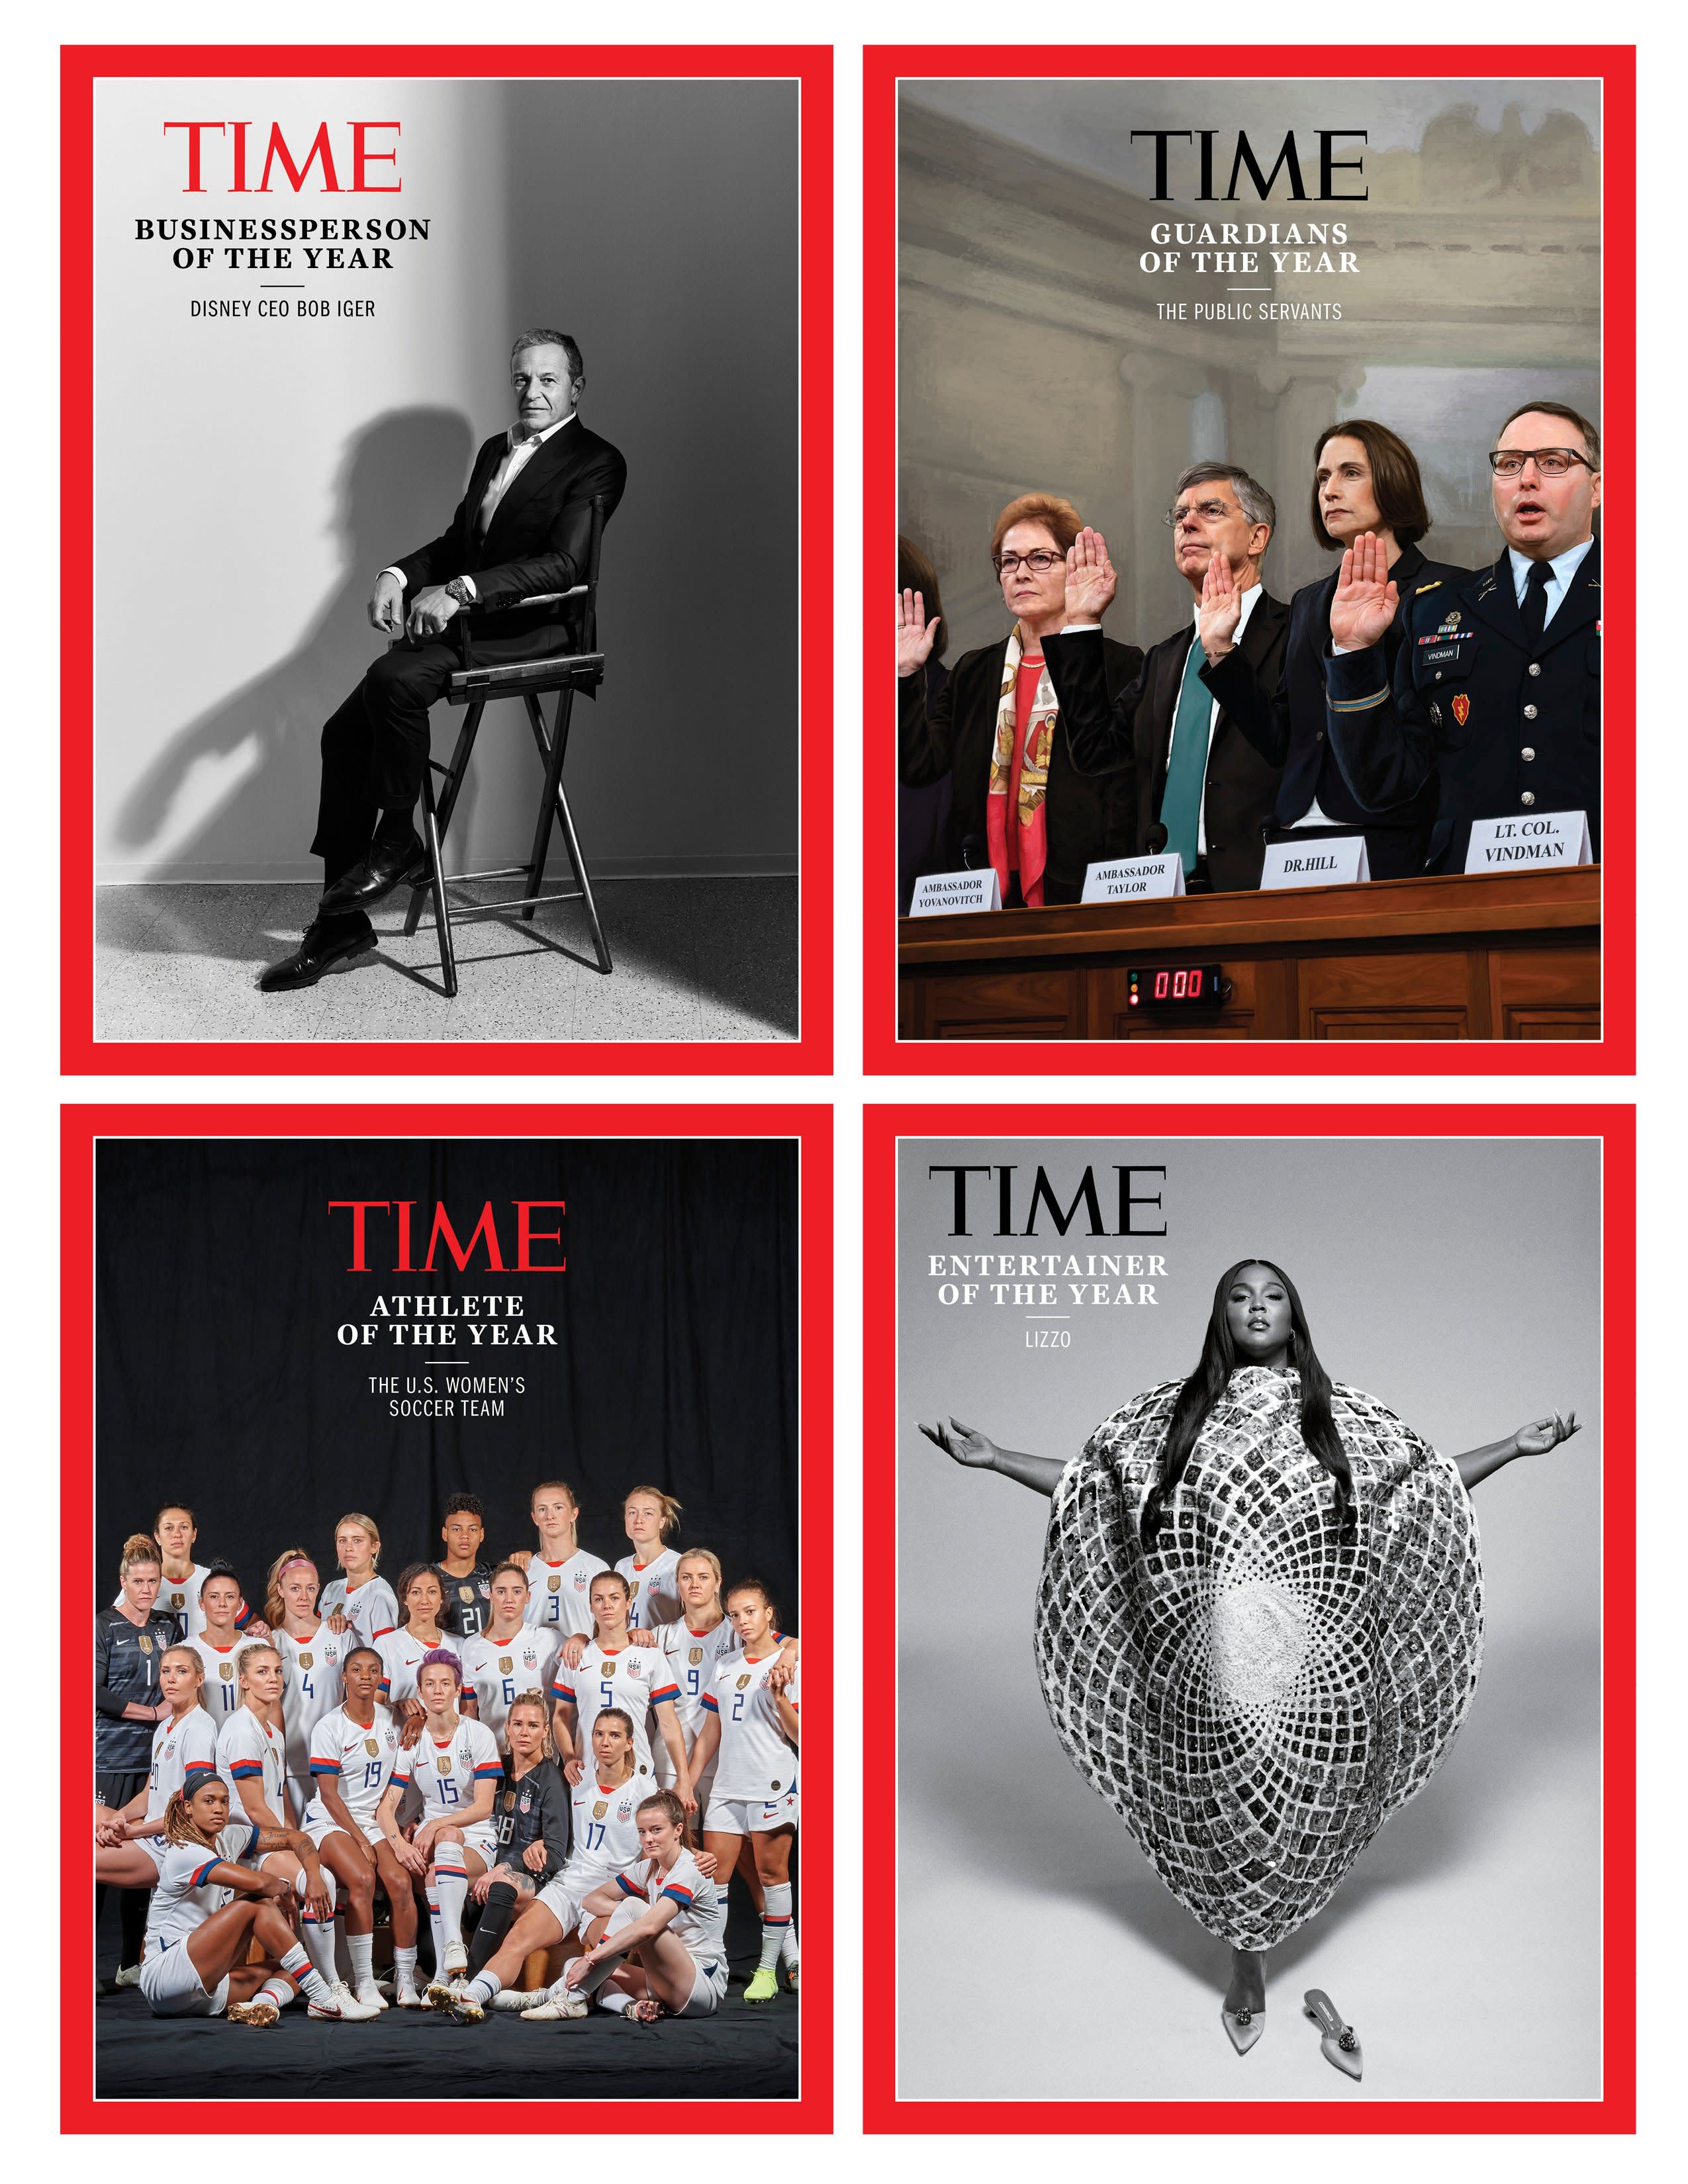 Behind the Scenes of TIME's 2019 Person of the Year Issue